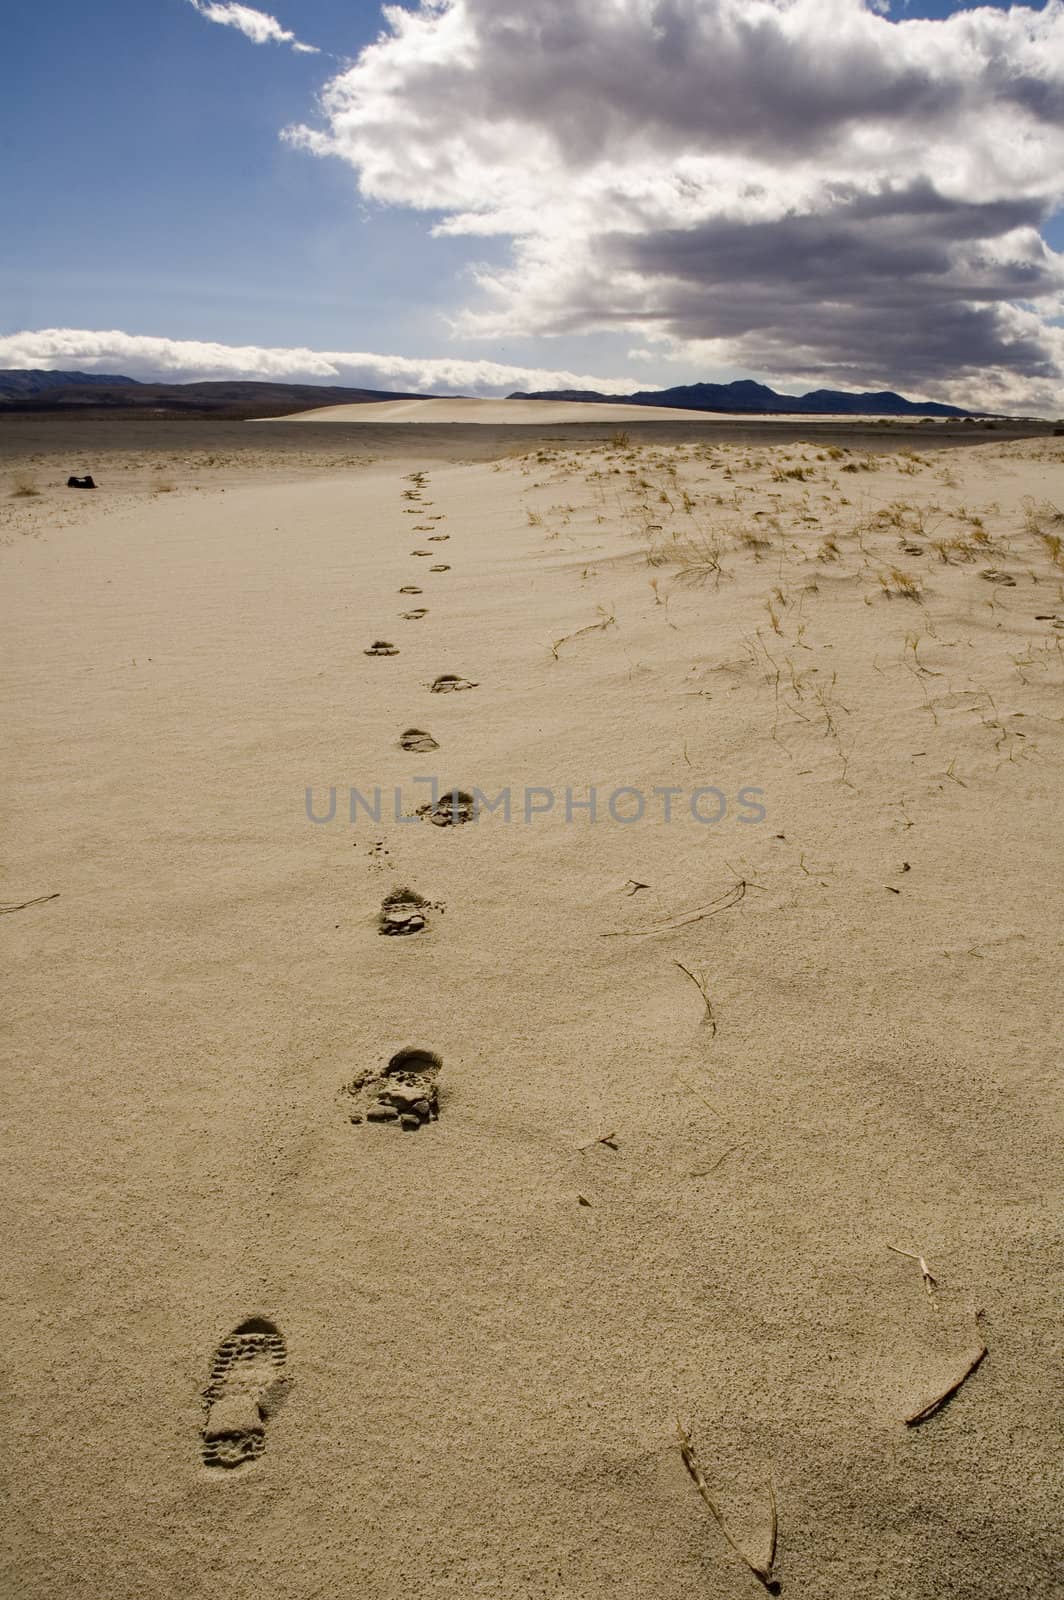 following footprints leading off towards the distant mountains and into the desert in Death Valley